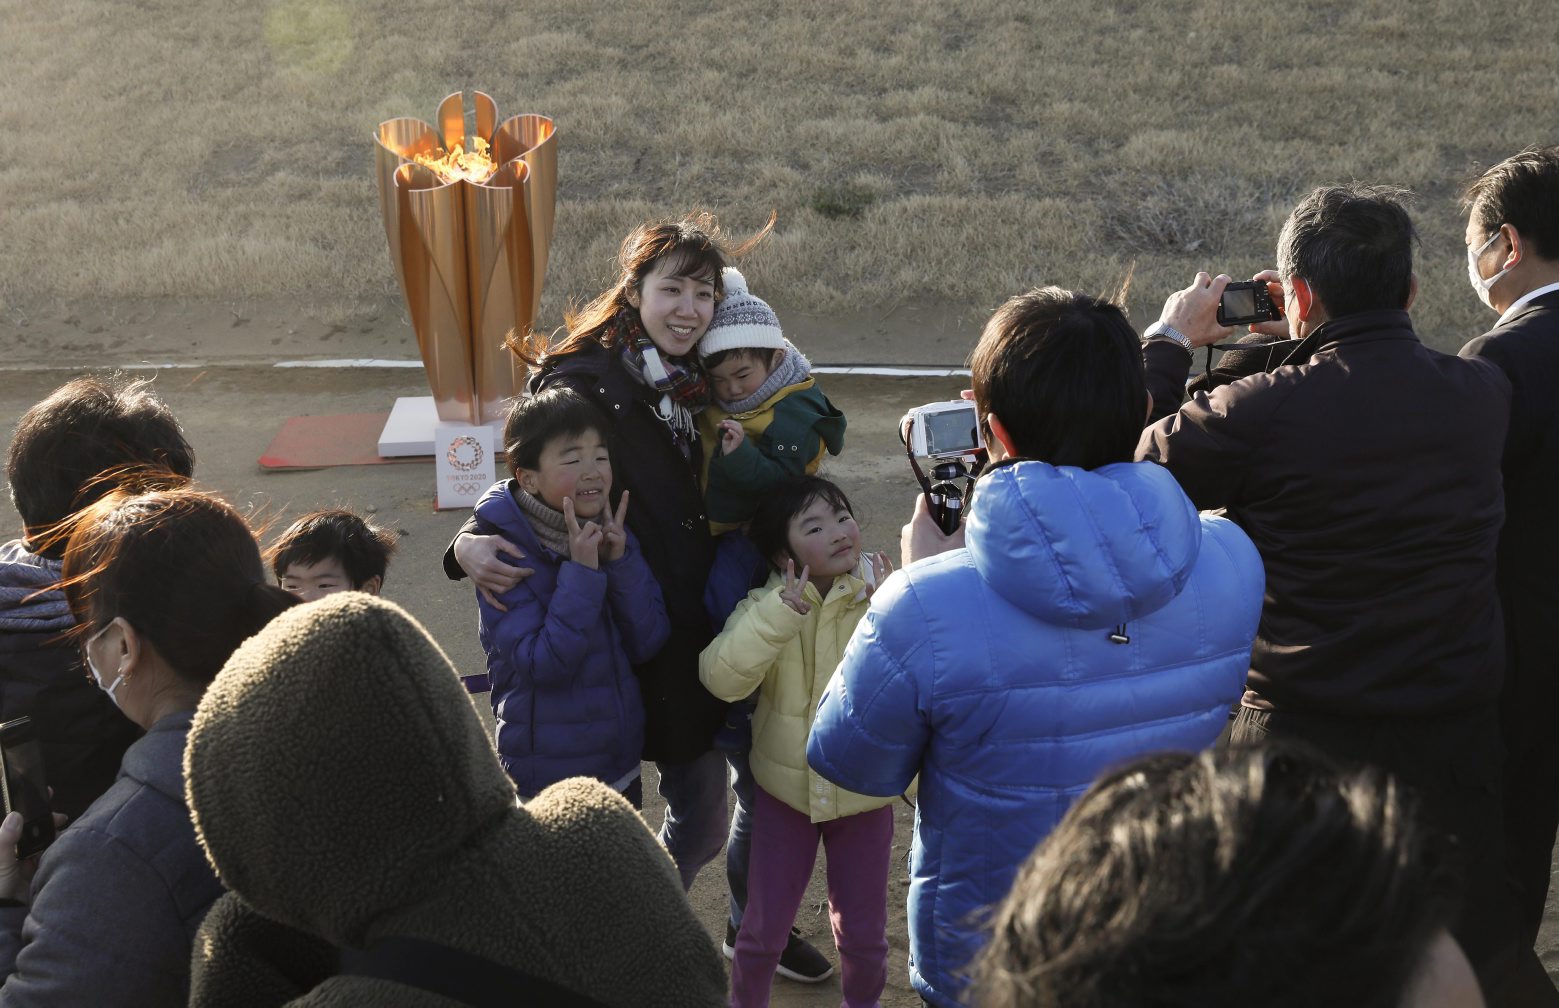 epa08308703 A family take a selfie with the Olympic flame on a cauldron displayed at Ishinomaki Minamihama Tsunami Recovery Memorial Park in Ishinomaki, Miyagi Prefecture, after the flame arrived in Higashimatsushima, northern Japan, 20 March 2020. Thousands of people in and out of the city make a long queue to see the flame displayed for about five hours. The Tokyo 2020 Olympic Flame arrival ceremony was scaled down over fears of coronavirus. Japanese Prime Minister Shinzo Abe is still considering holding the Tokyo Olympics as scheduled despite the current coronavirus pandemic.  EPA/KIMIMASA MAYAMA JAPAN PANDEMIC CORONAVIRUS COV?ID-19 OLYMPICS